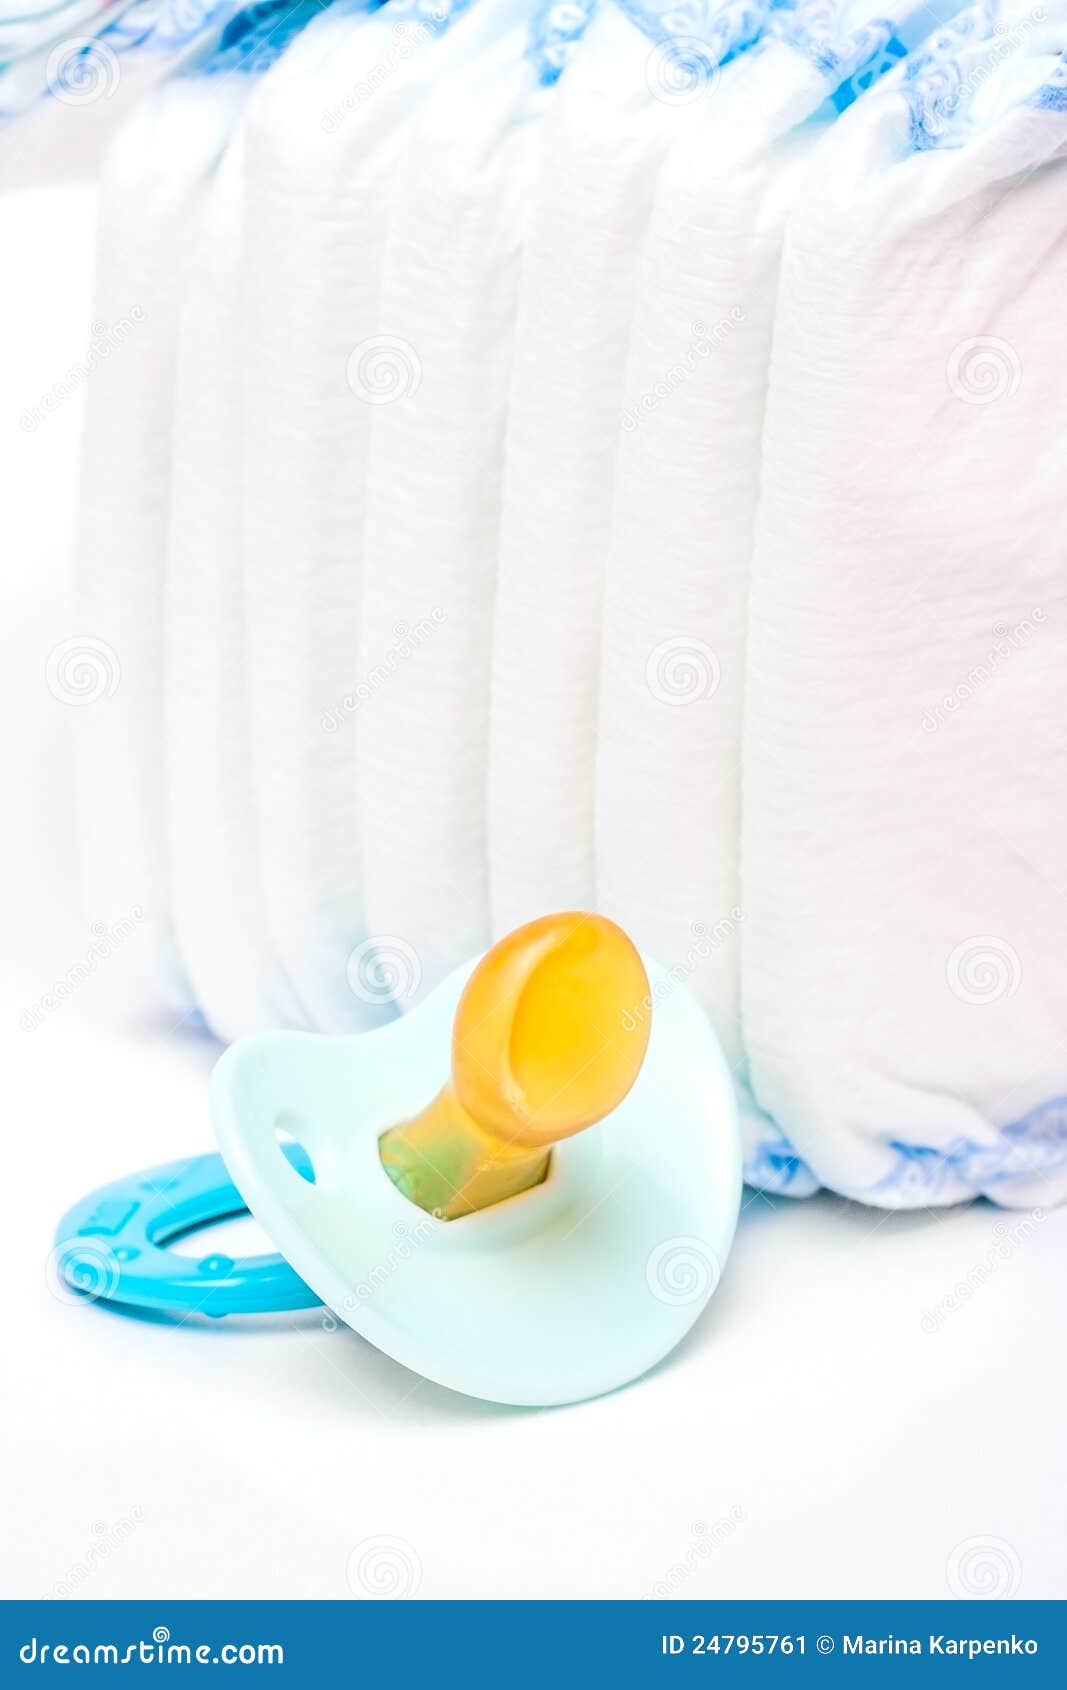 The Pile of Diapers and Baby S Dummy Stock Image - Image of hygiene ...